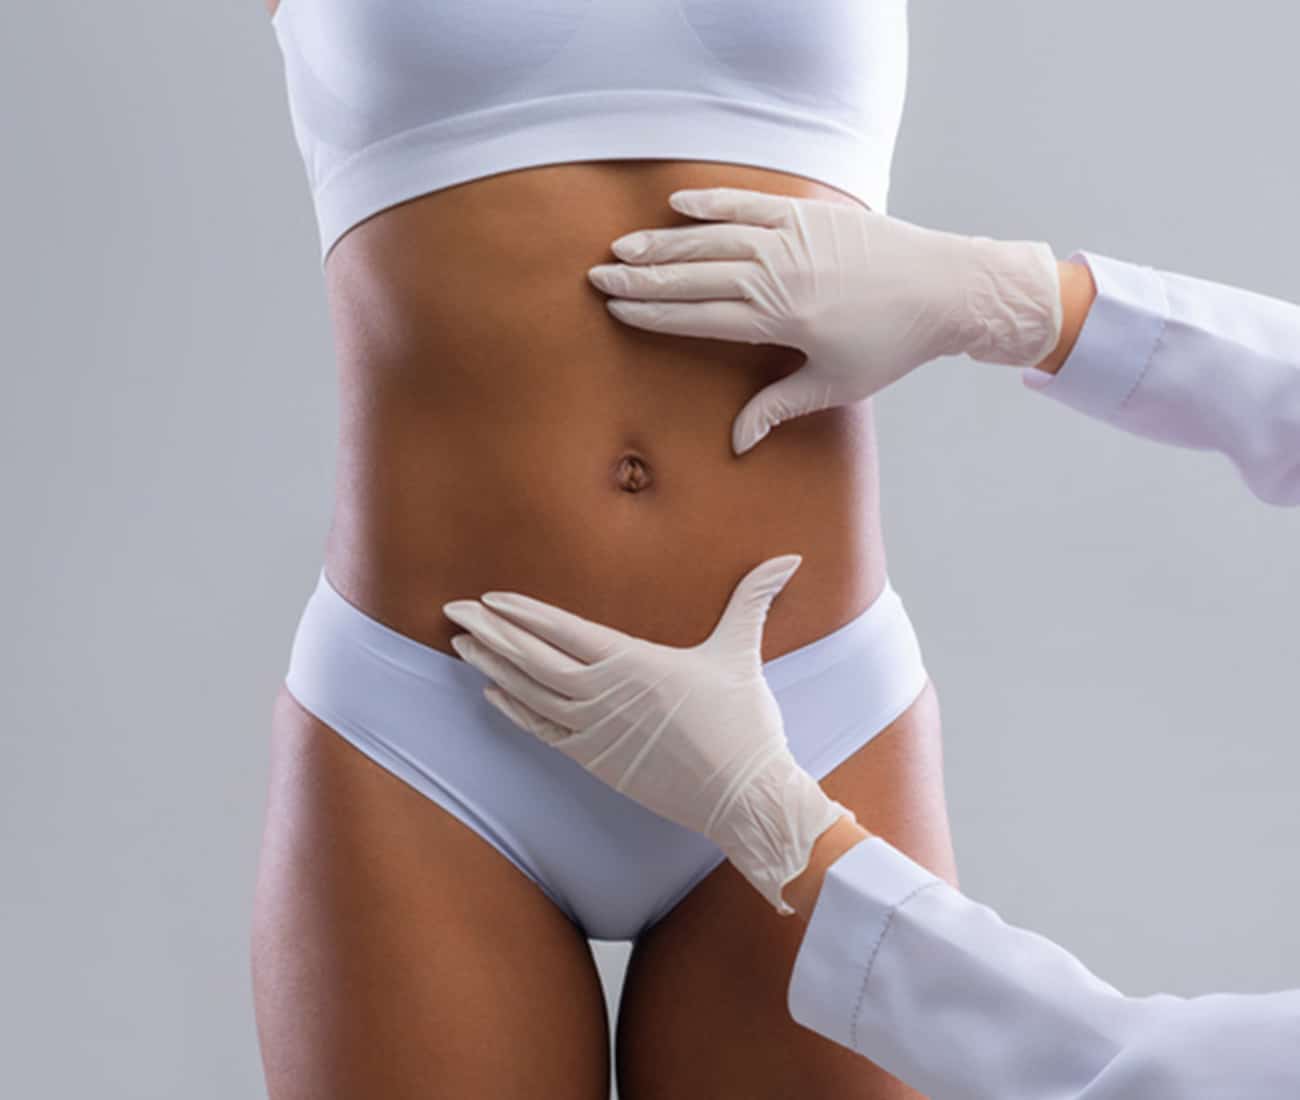 How To Incorporate Noninvasive Body Sculpting To Achieve Your Body